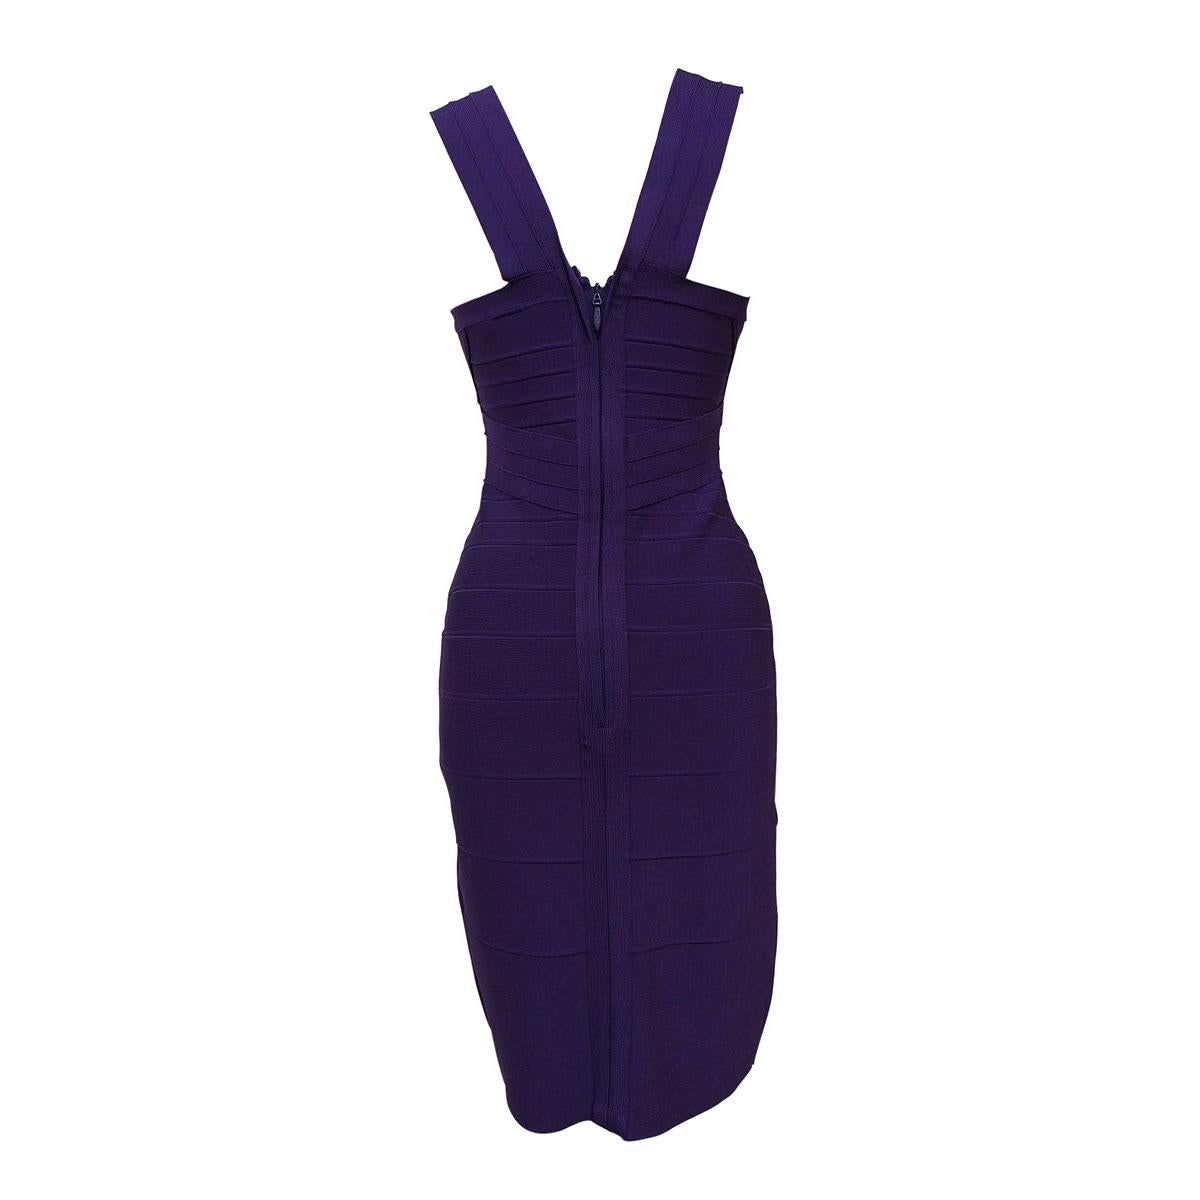 Iconic and very beautiful Herve Leger dress
Rayon (90%) Nylon
Stretch 
Purple color
Zip on back
Sleeveless
Total length cm 97 (38,18 inches)
Worldwide express shipping included in the price !